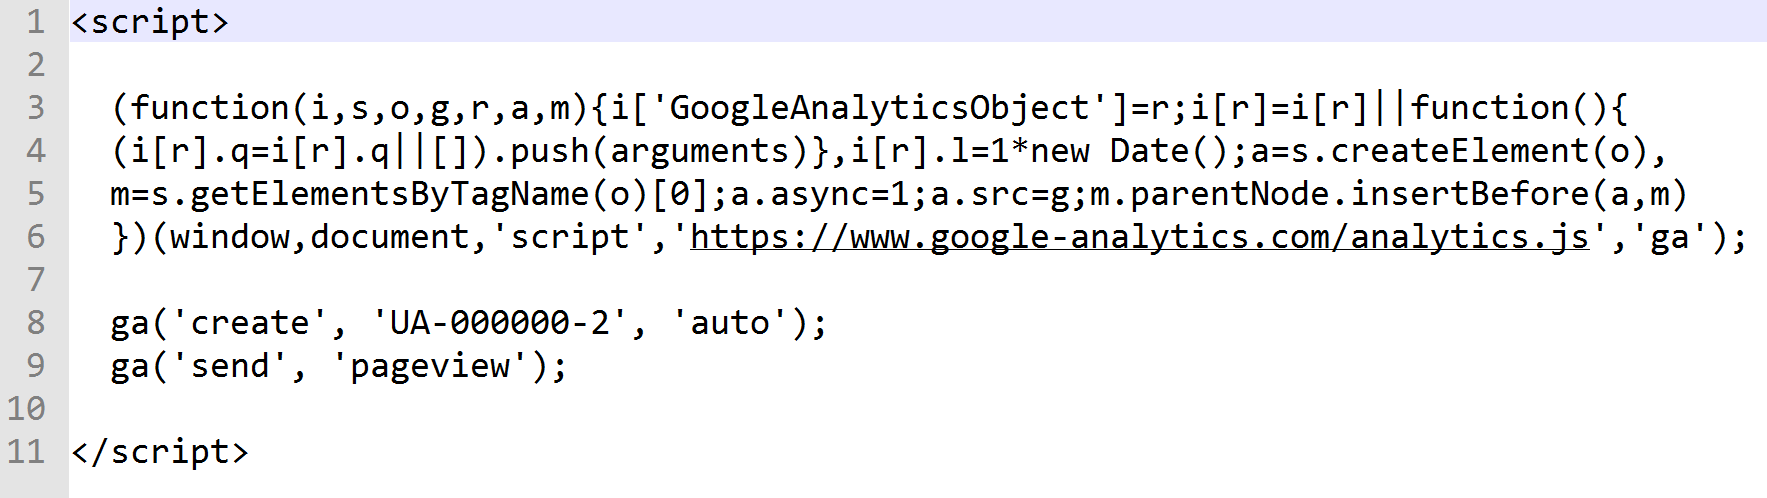 Screenshot of the Google Analytics code snippet in the converted web page